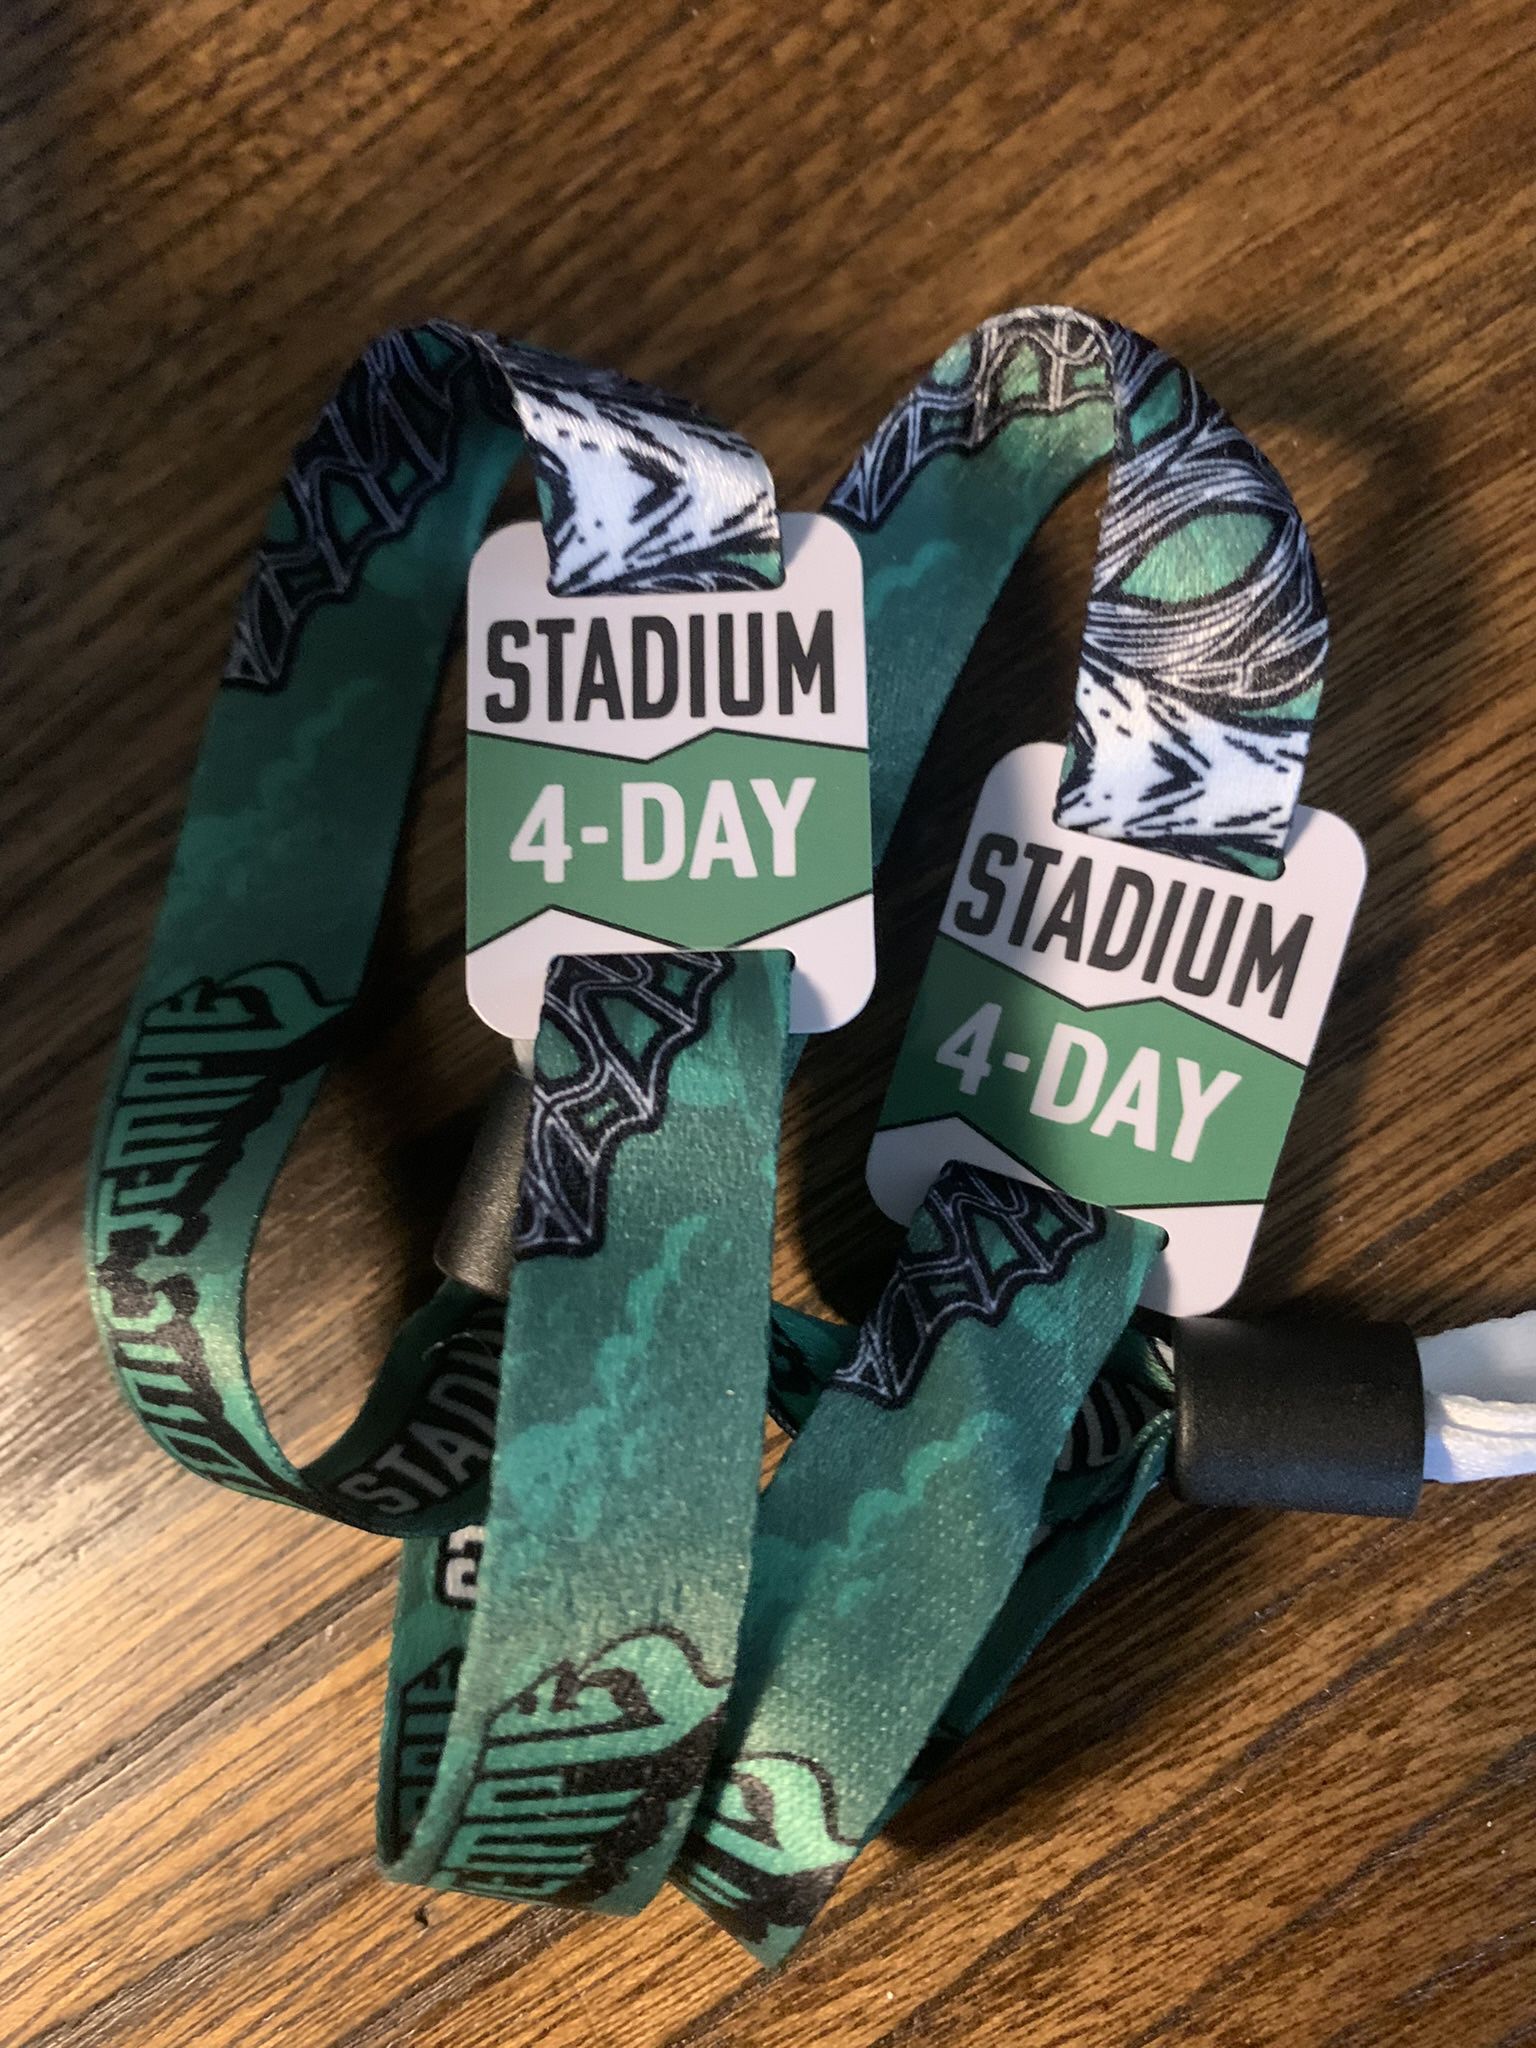 2 Sonic Temple 4 Day Passes!